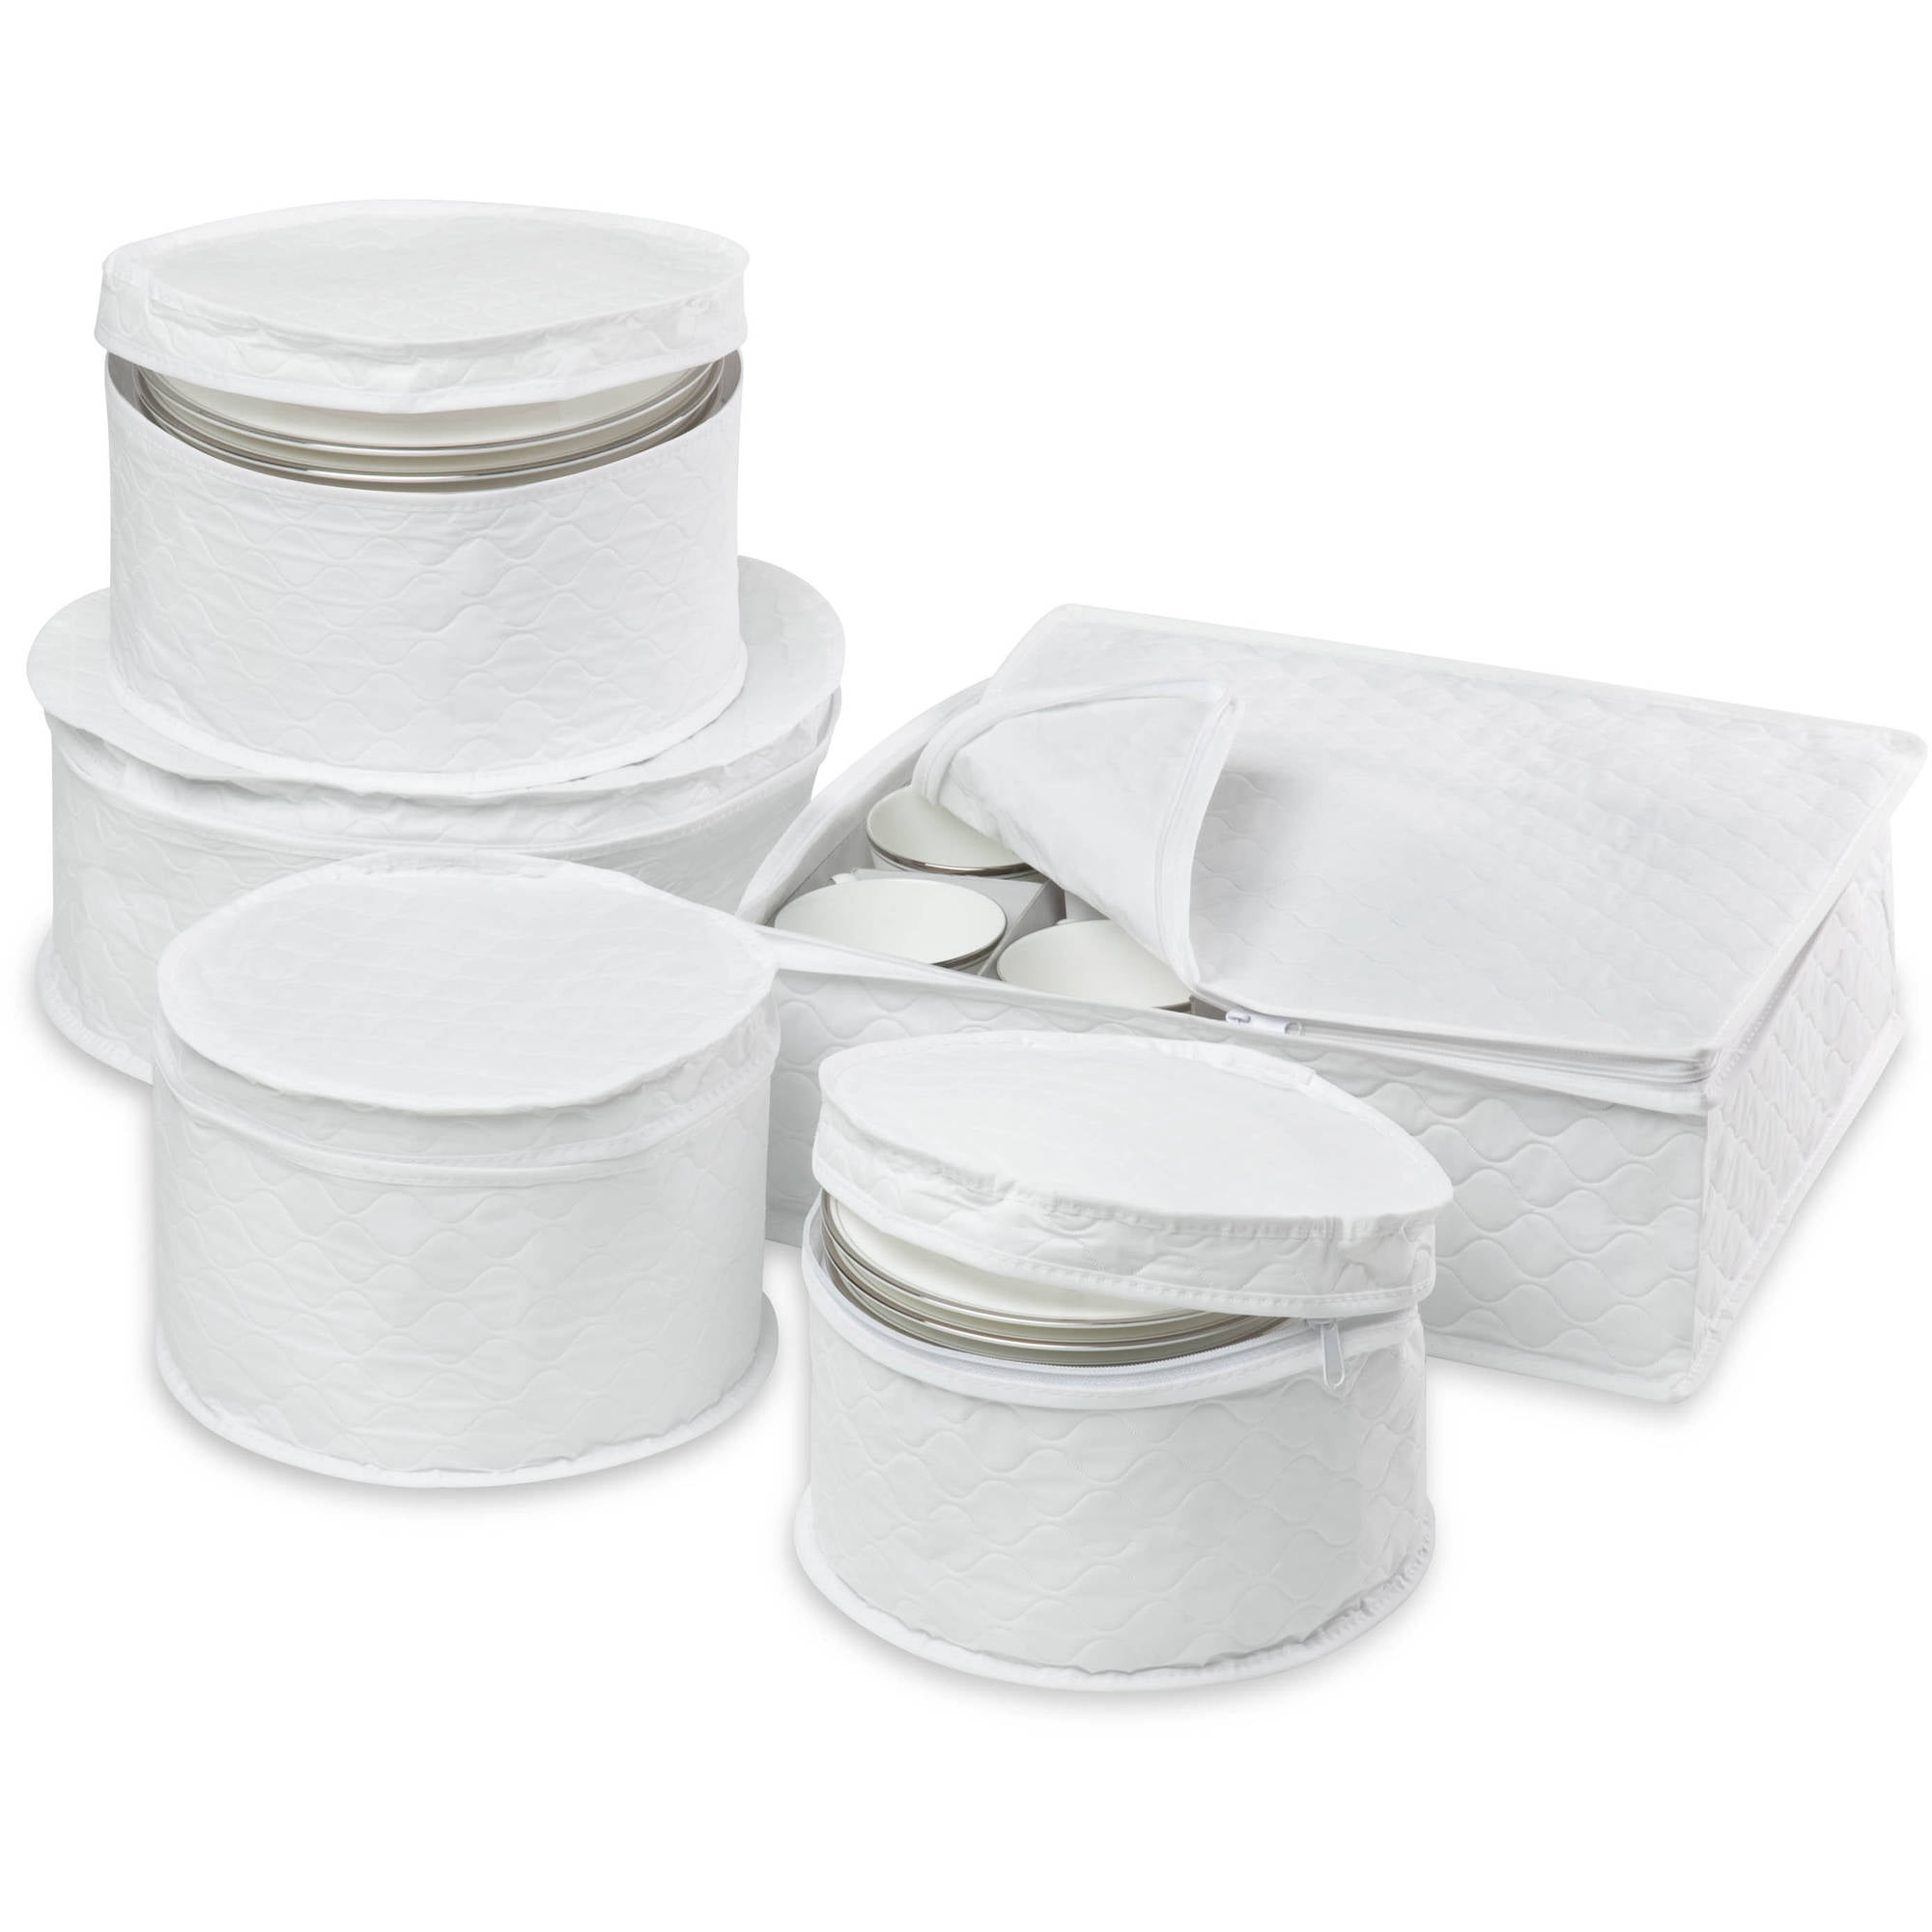 China Storage Box Set for Dinnerware,Dishes Storage Containers for Saucers and 